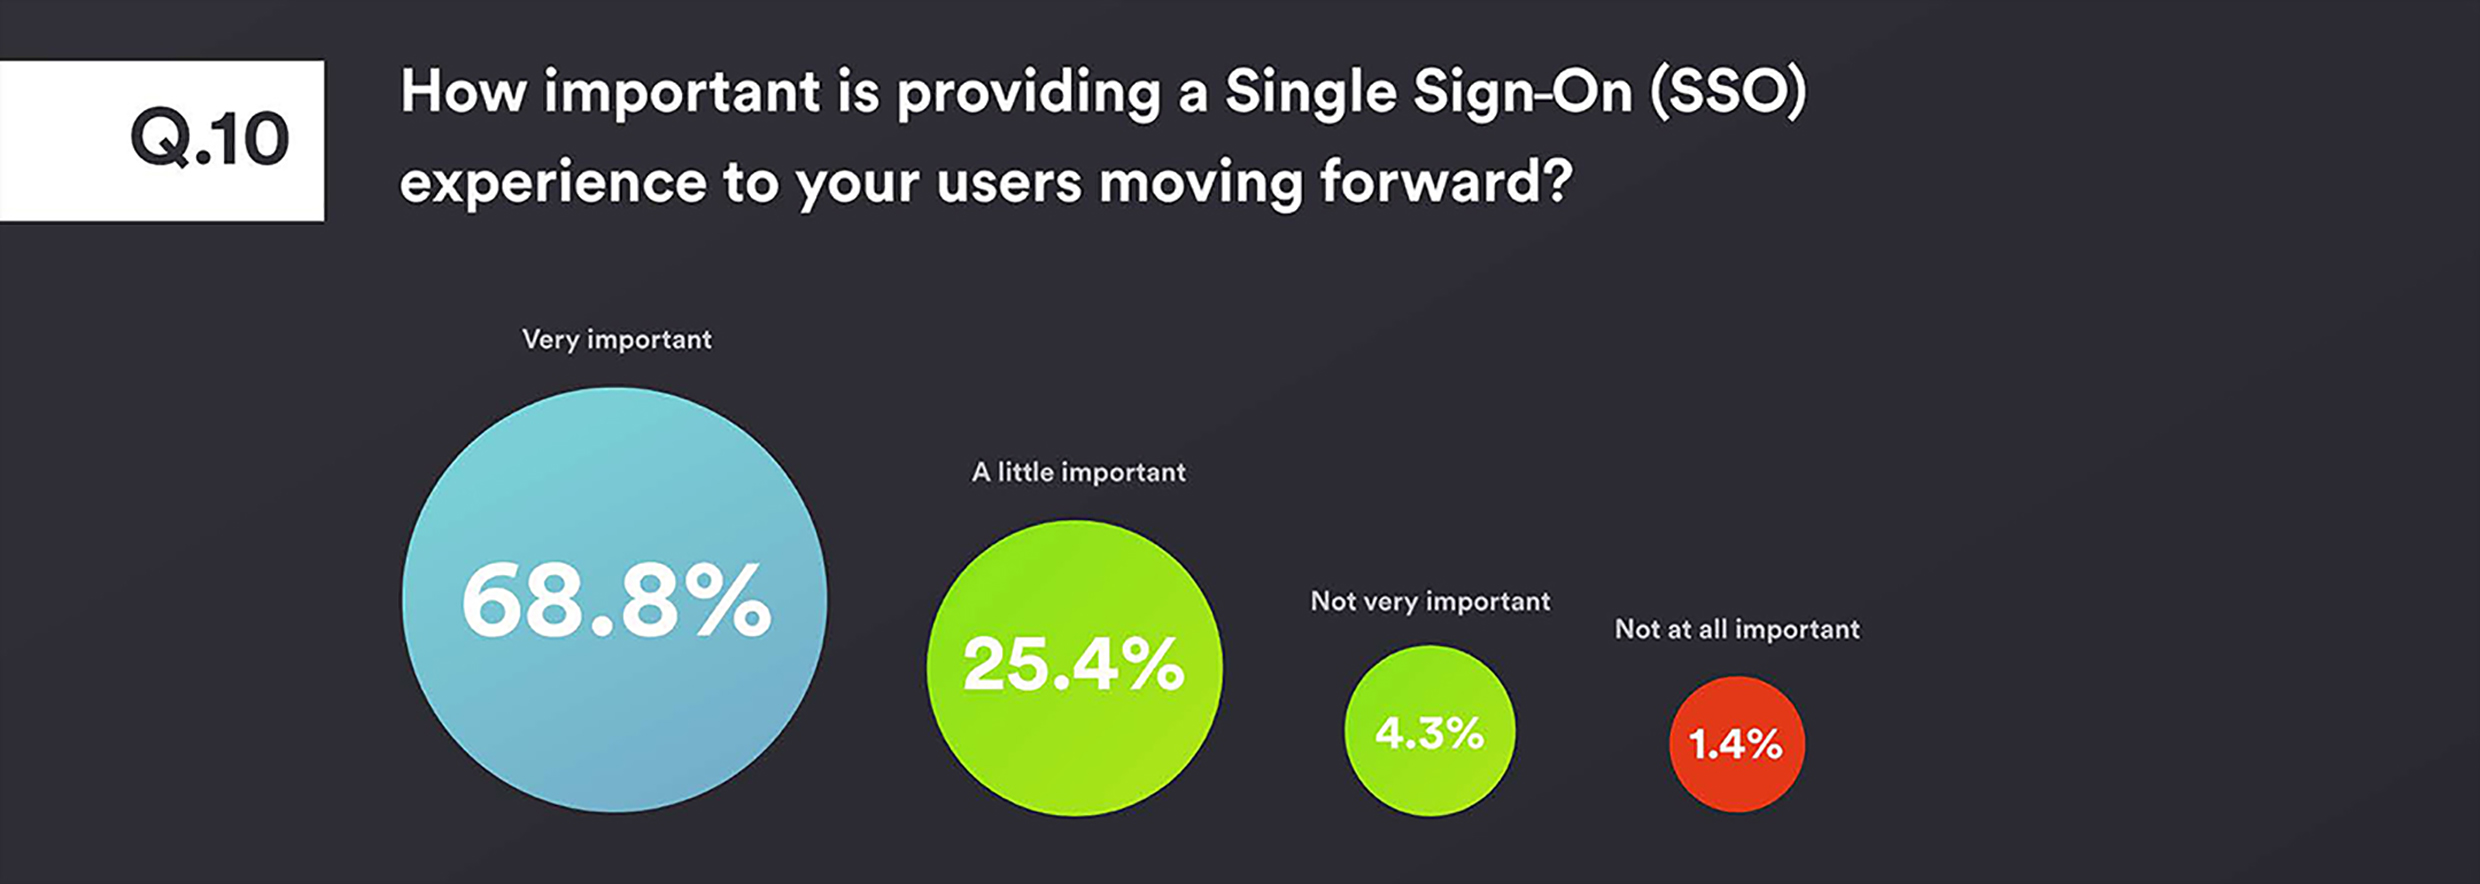 Authentication Survey Question 10 - How important is providing a Single Sign On (SSO) experience to your users moving forward? 68.8% thought SSO was very important, 25.4% considered it a little important, 4.3% not very important and 1.4% not at all important.